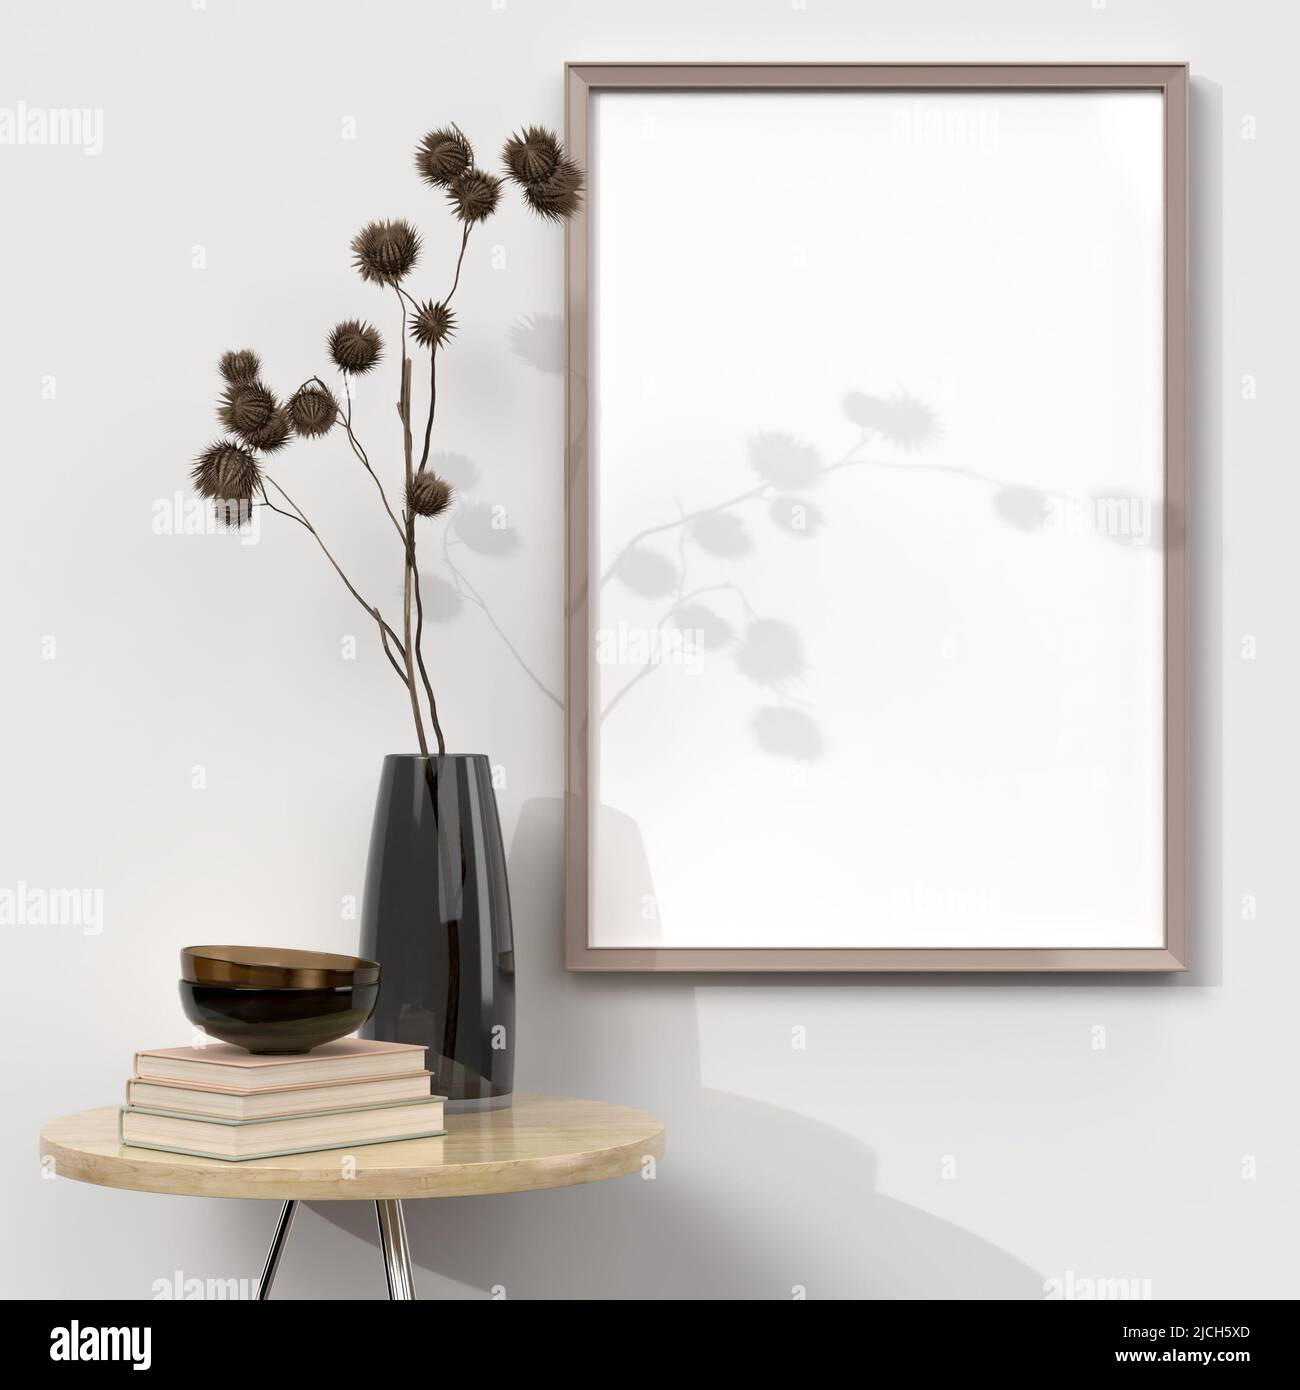 empty mockup photo frame on wooden shelf in room interior close up . Modern and floral concept of shelves. with window shadows Stock Photo